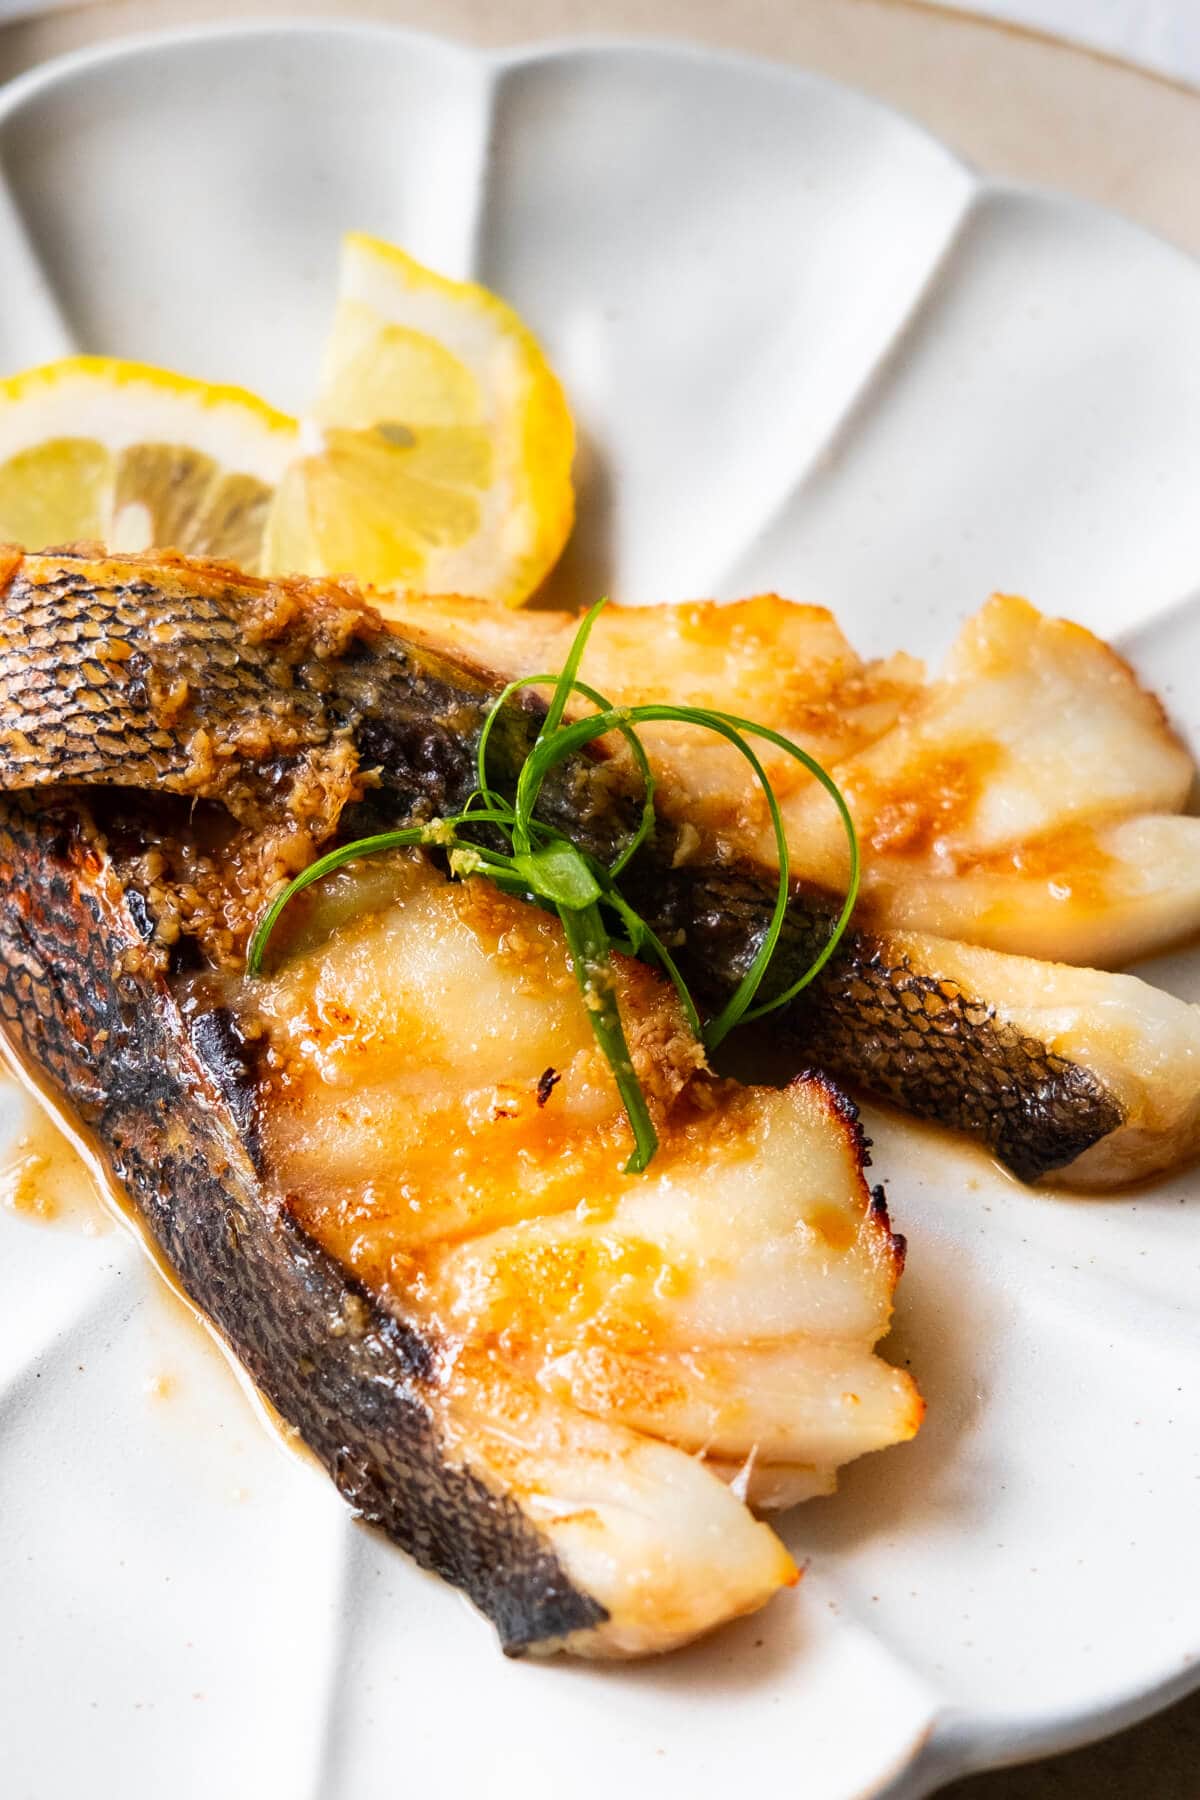 Oven baked sea bass fillet recipe served with lemon wedges. 